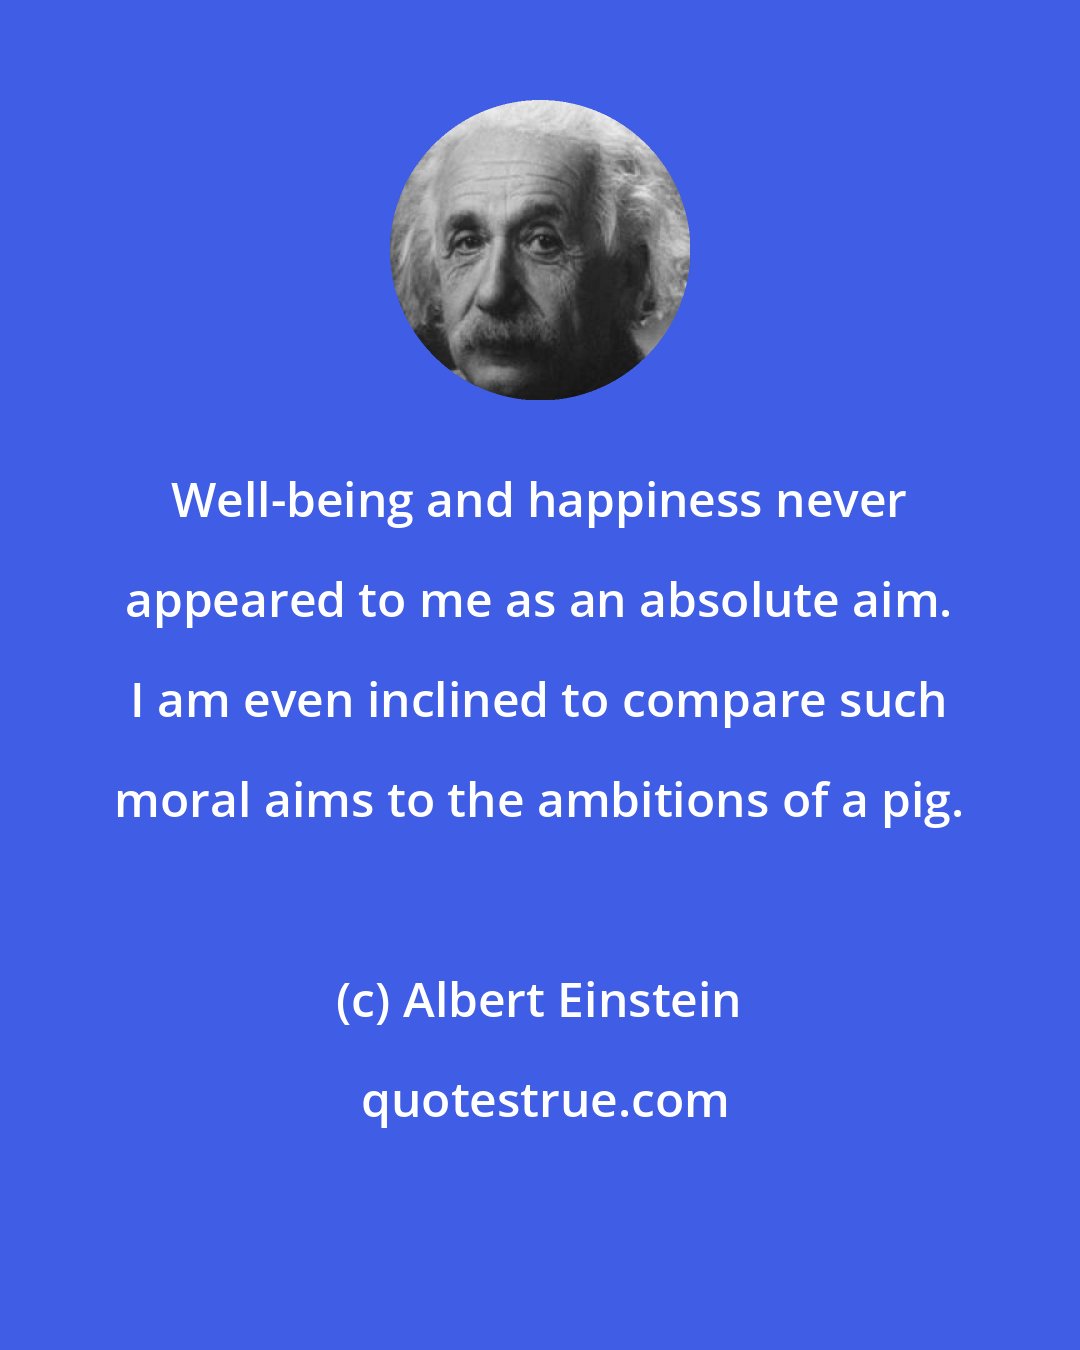 Albert Einstein: Well-being and happiness never appeared to me as an absolute aim. I am even inclined to compare such moral aims to the ambitions of a pig.